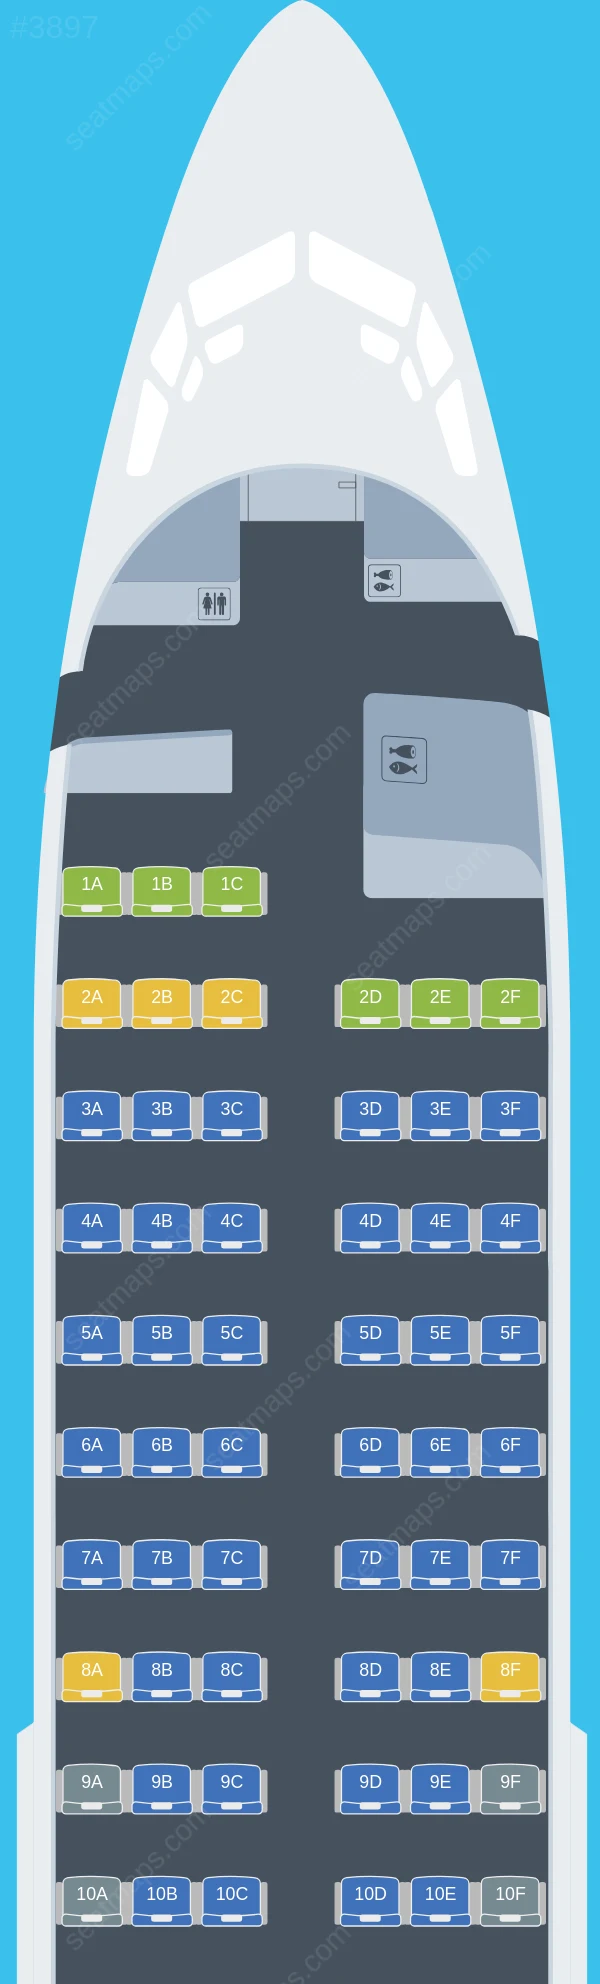 Luxair Boeing 737-700 seatmap preview